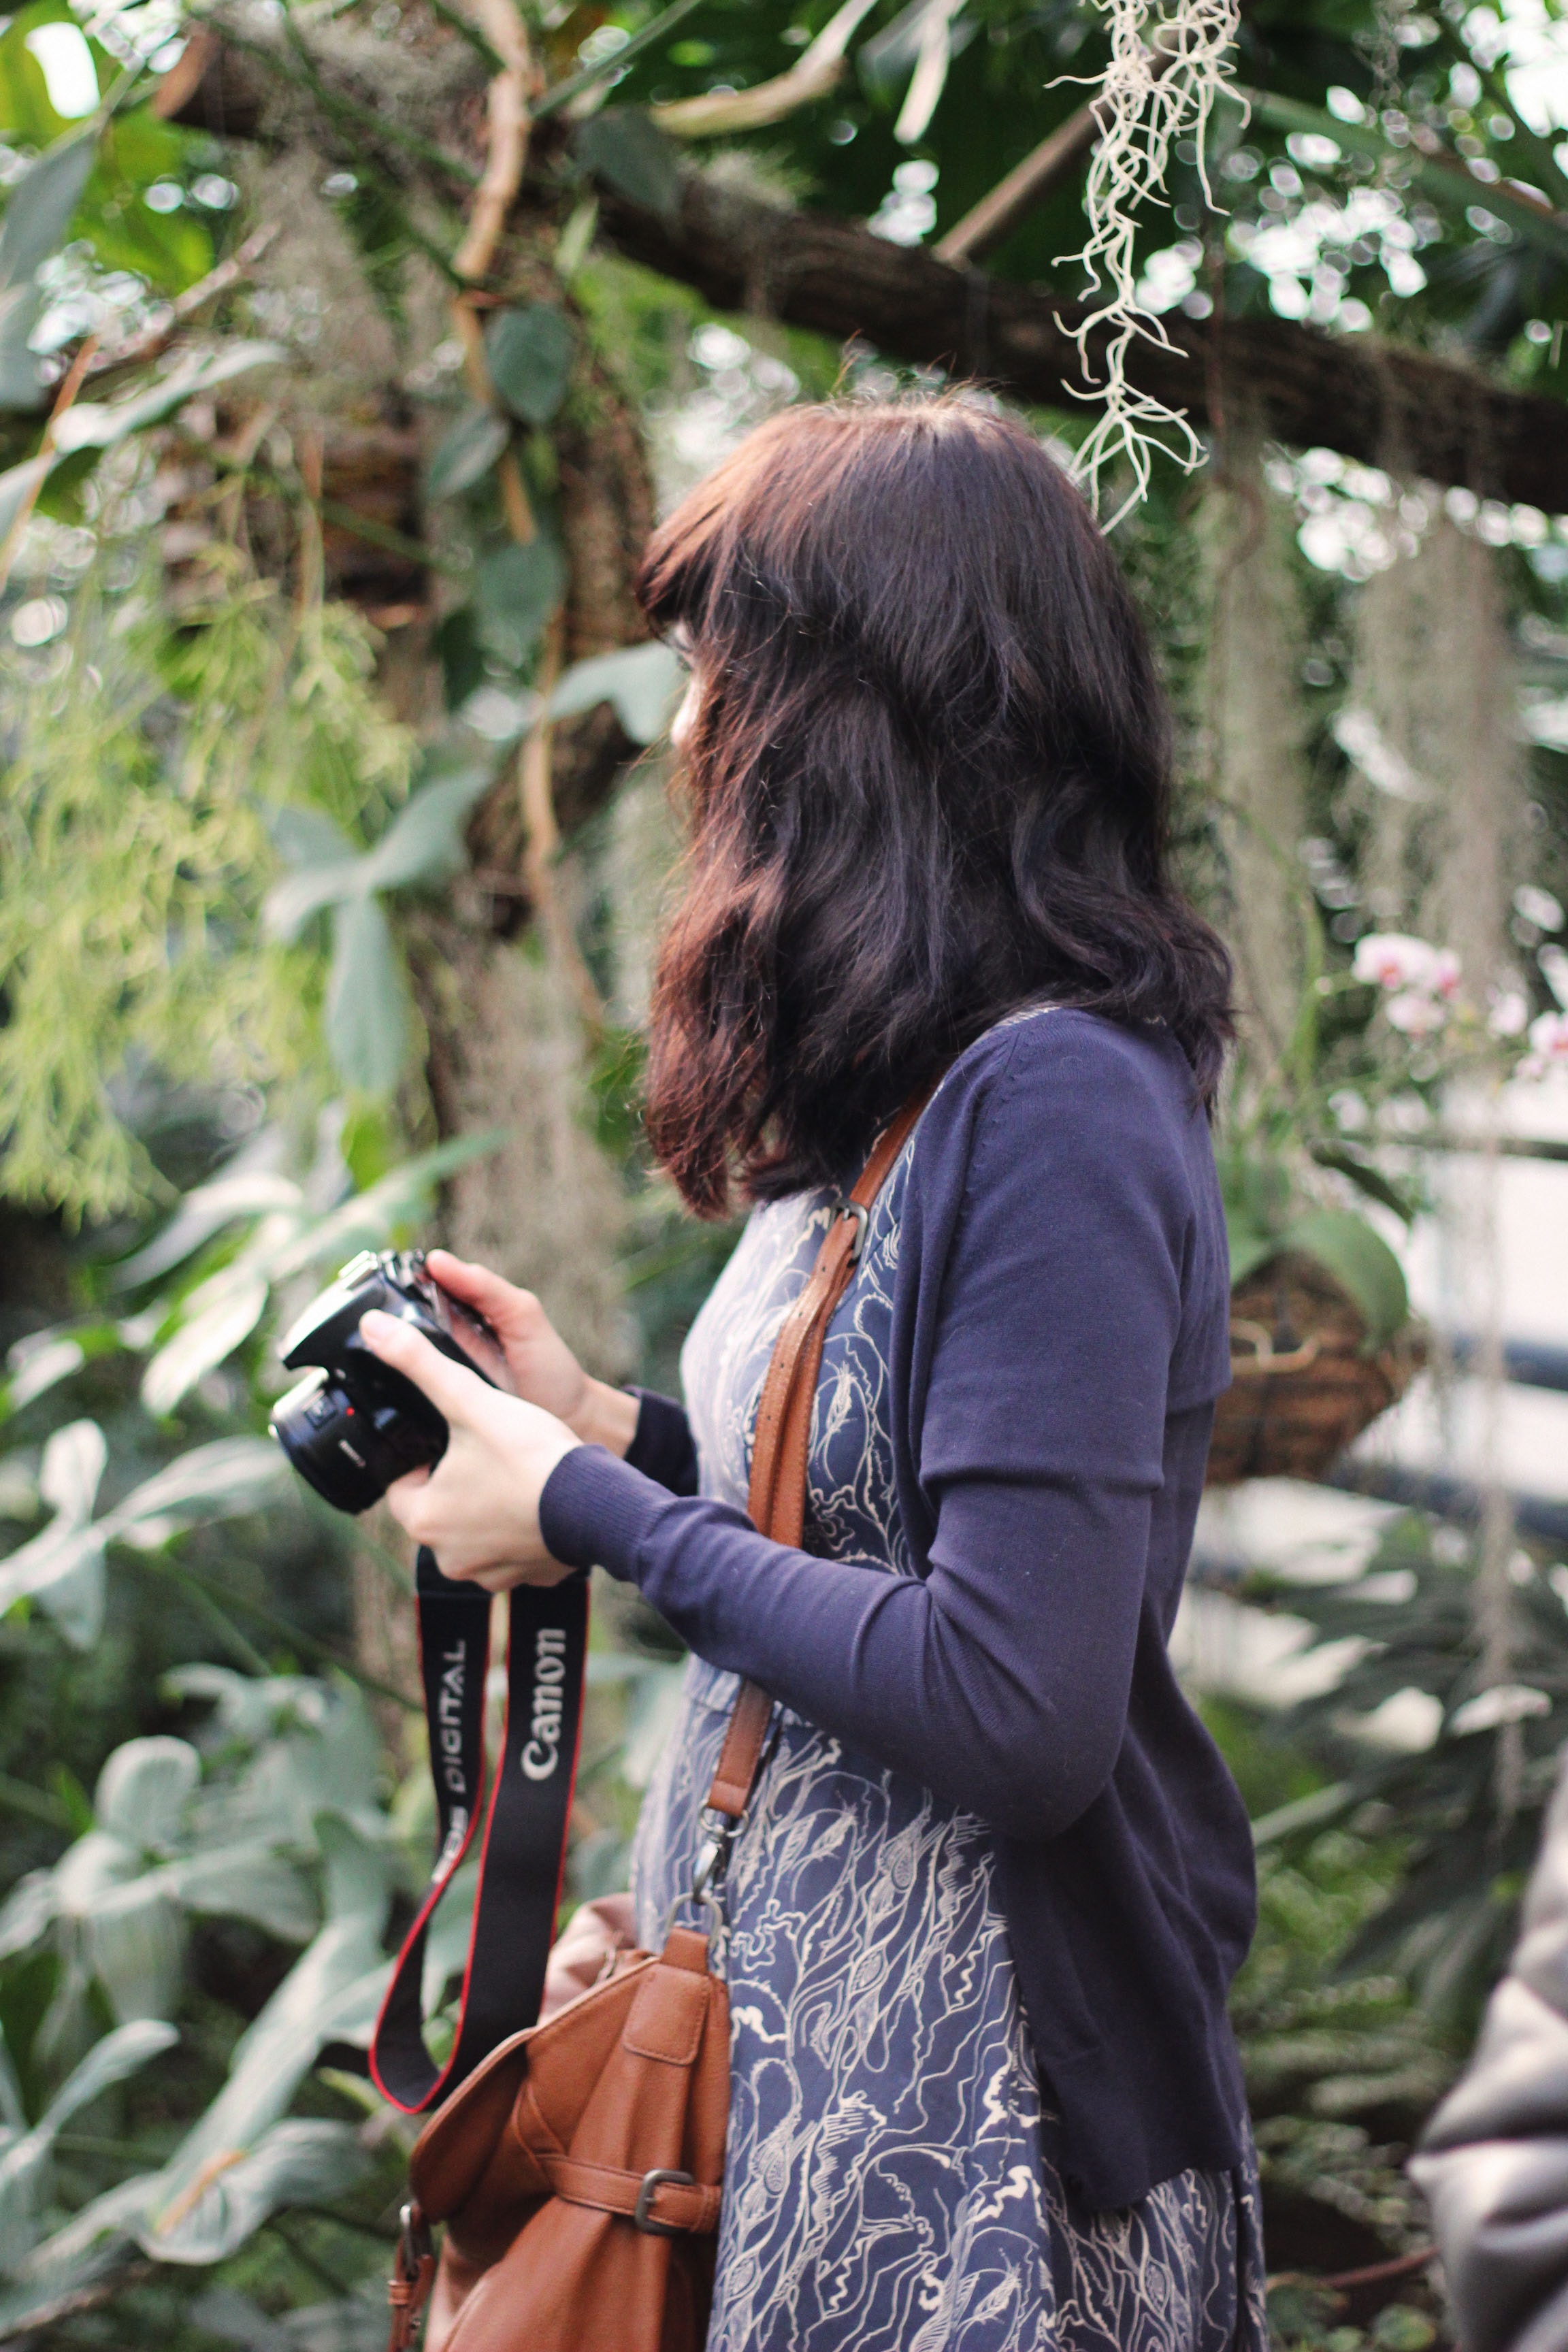 Woman in Blue Cardigan Holding Canon Dslr Camera, Bag, Park, Young, Woman, HQ Photo